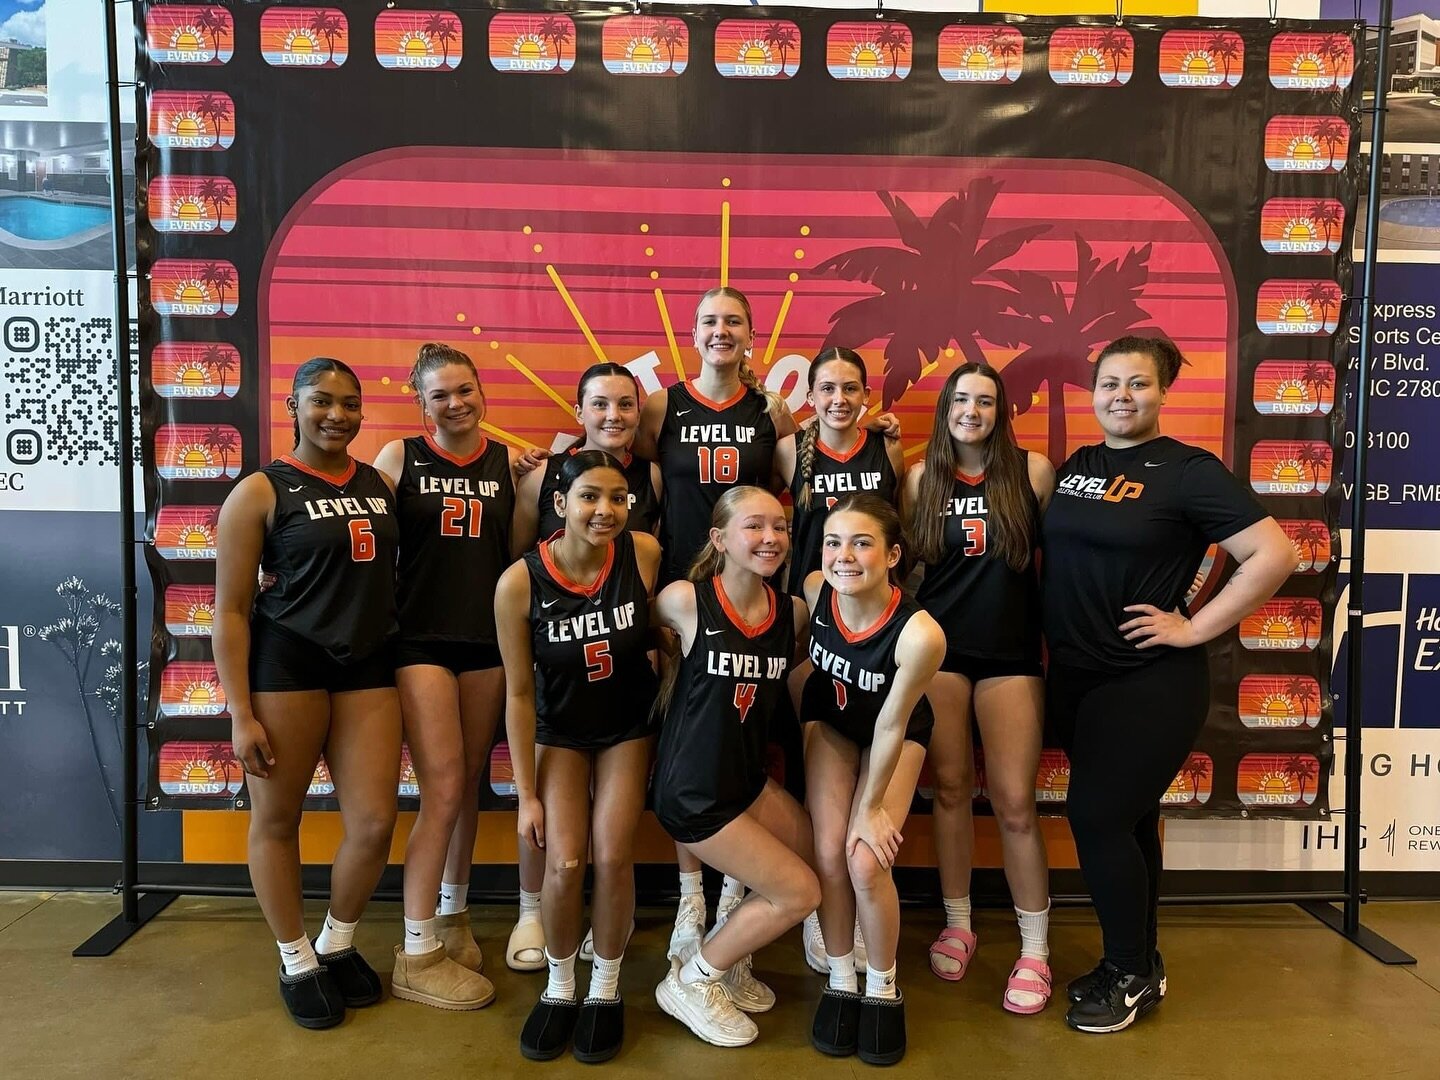 🏆 LUVC 16s Nationals team won silver bracket this past weekend‼️ 

Proud of these girls! Coming back ready to prepare for the next! 💪🏼